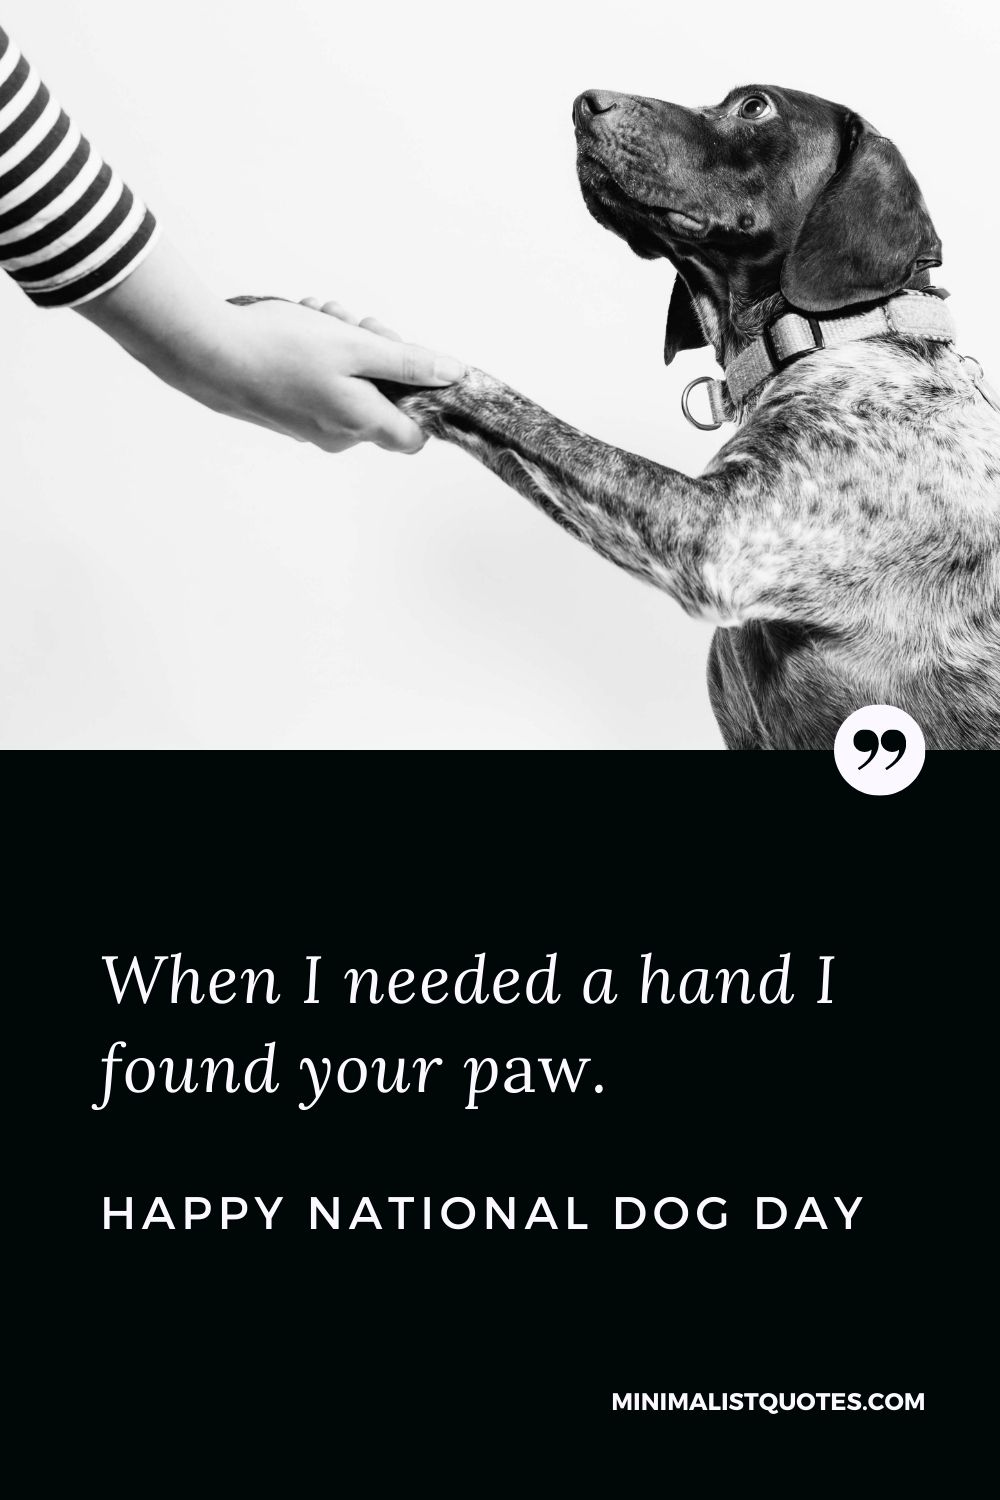 National Dog Day Quote, Message & Wish With Image: When I needed a hand I found your paw. Happy National Dog Day!